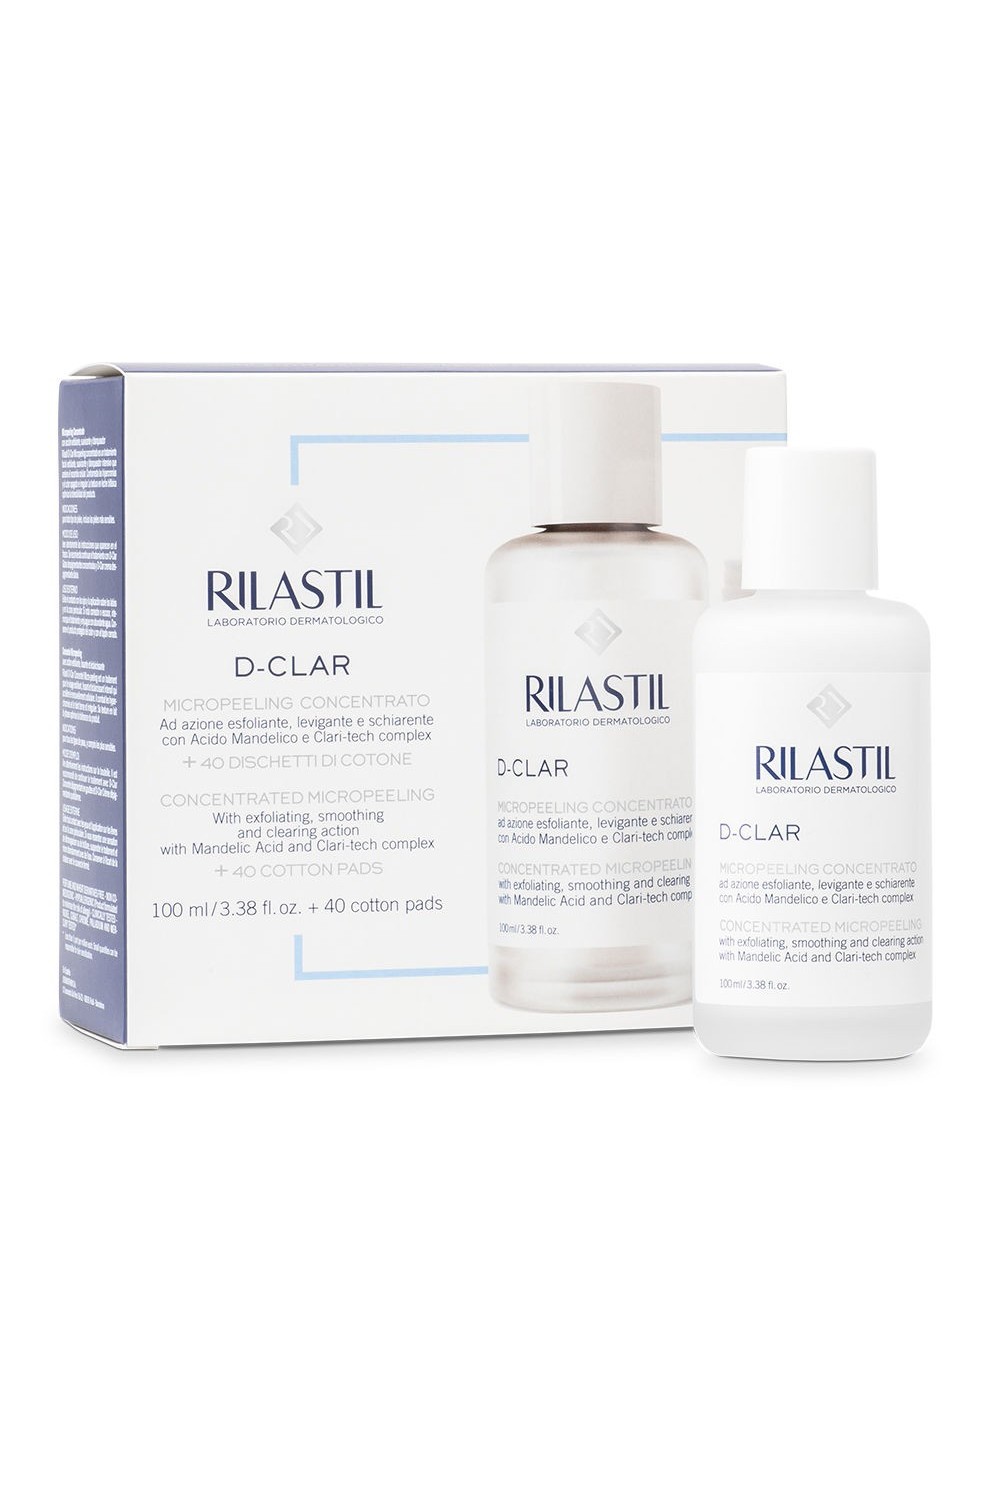 RILASTIL - Rilasil D-Clar Concentrated Micropeeling 100ml